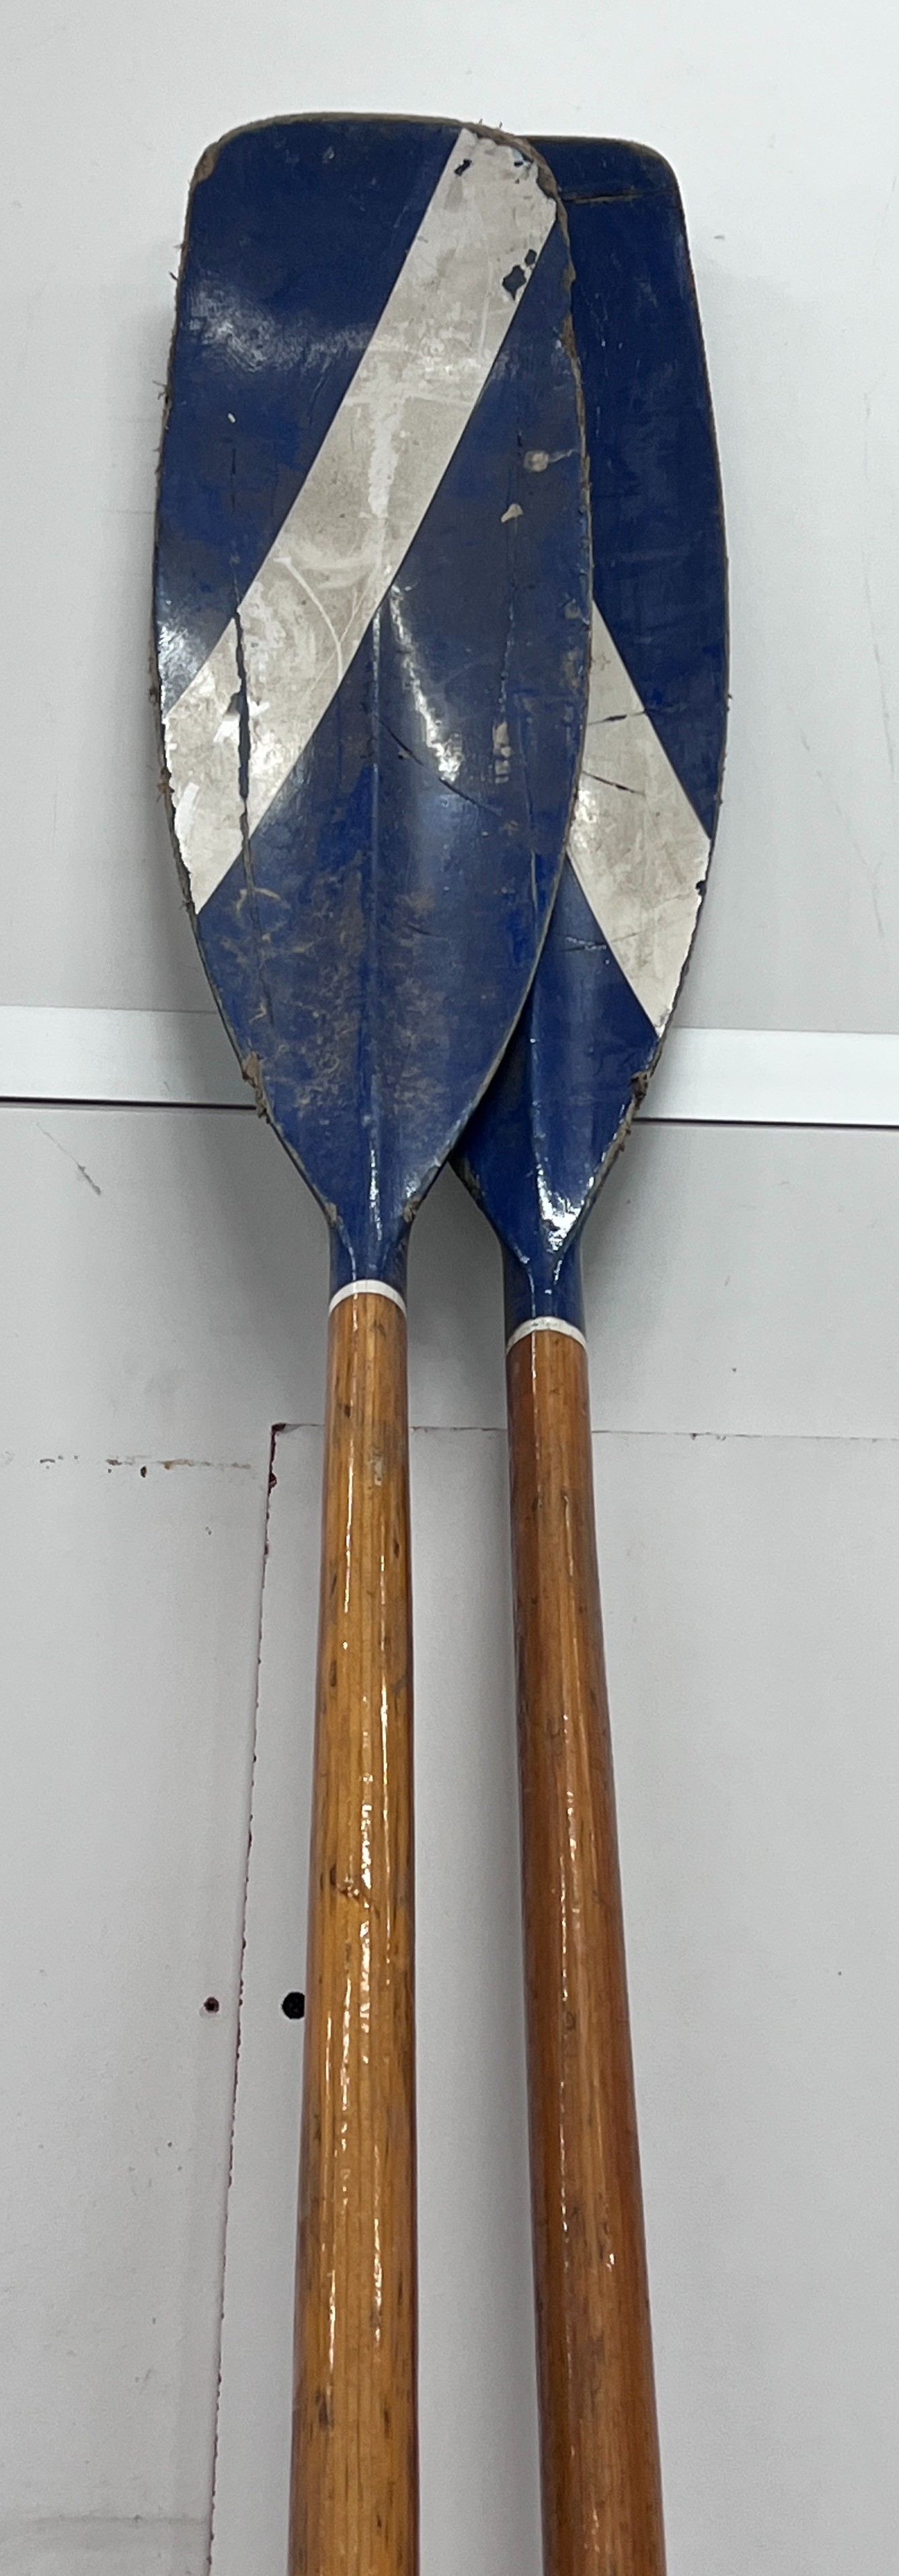 A pair of vintage wooden oars with painted blades, length 298cm